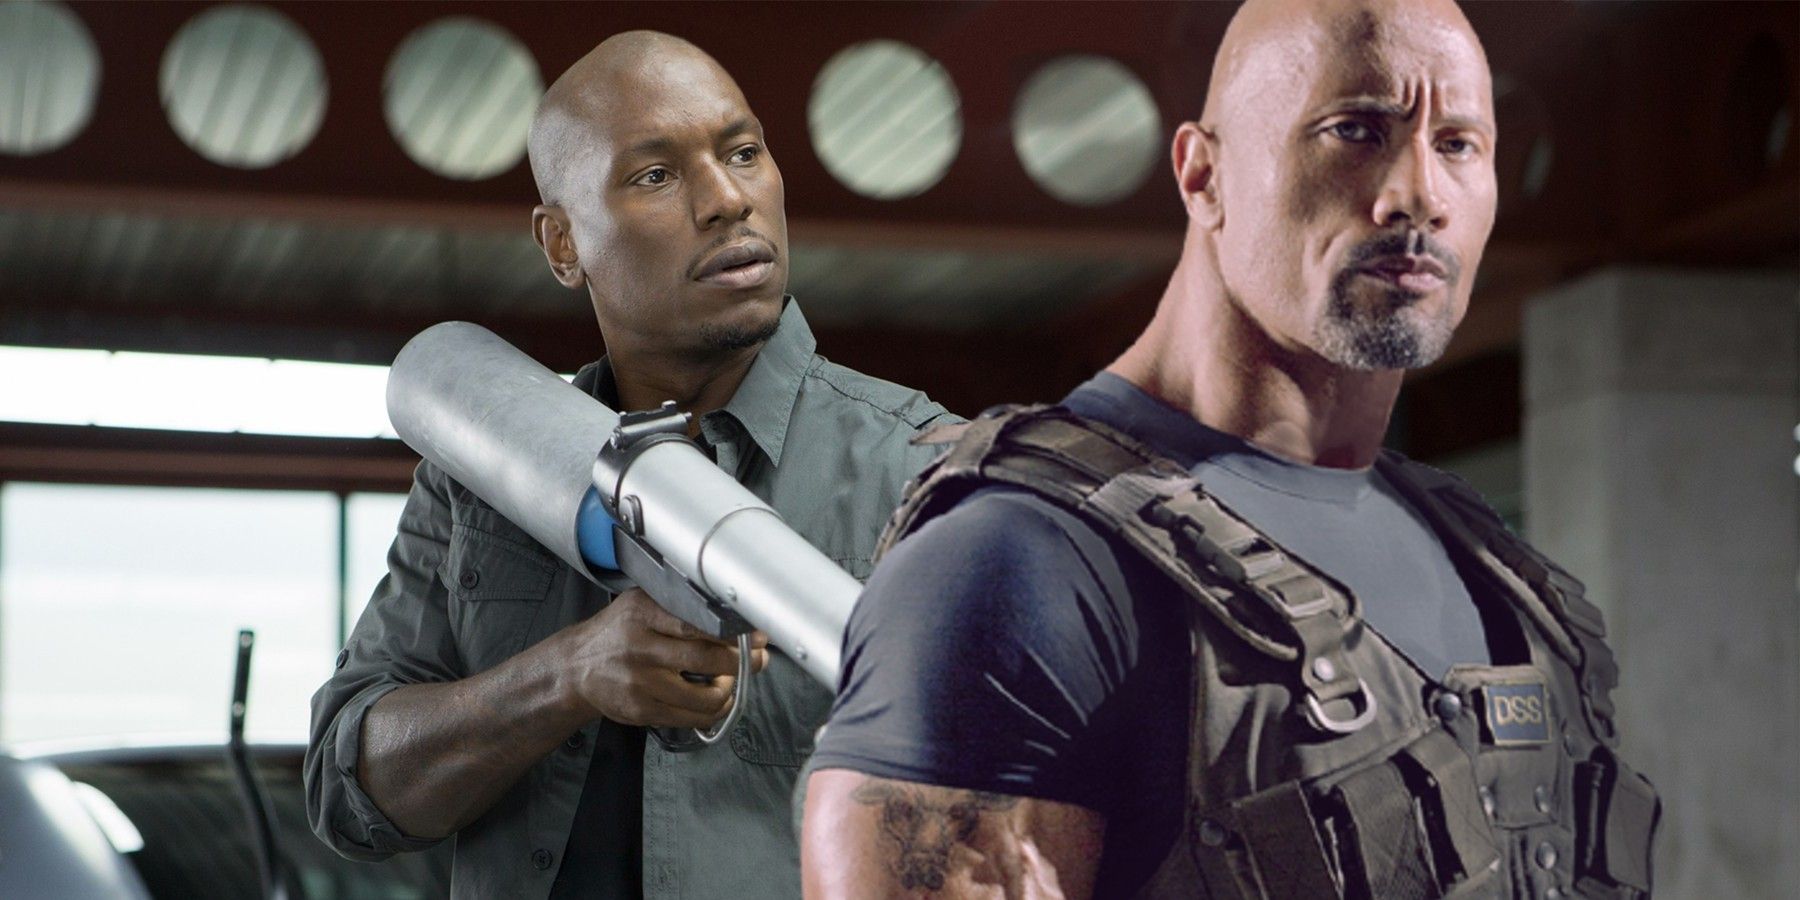 Fast and Furious Tyrese Gibson Dwayne Johnson feud over